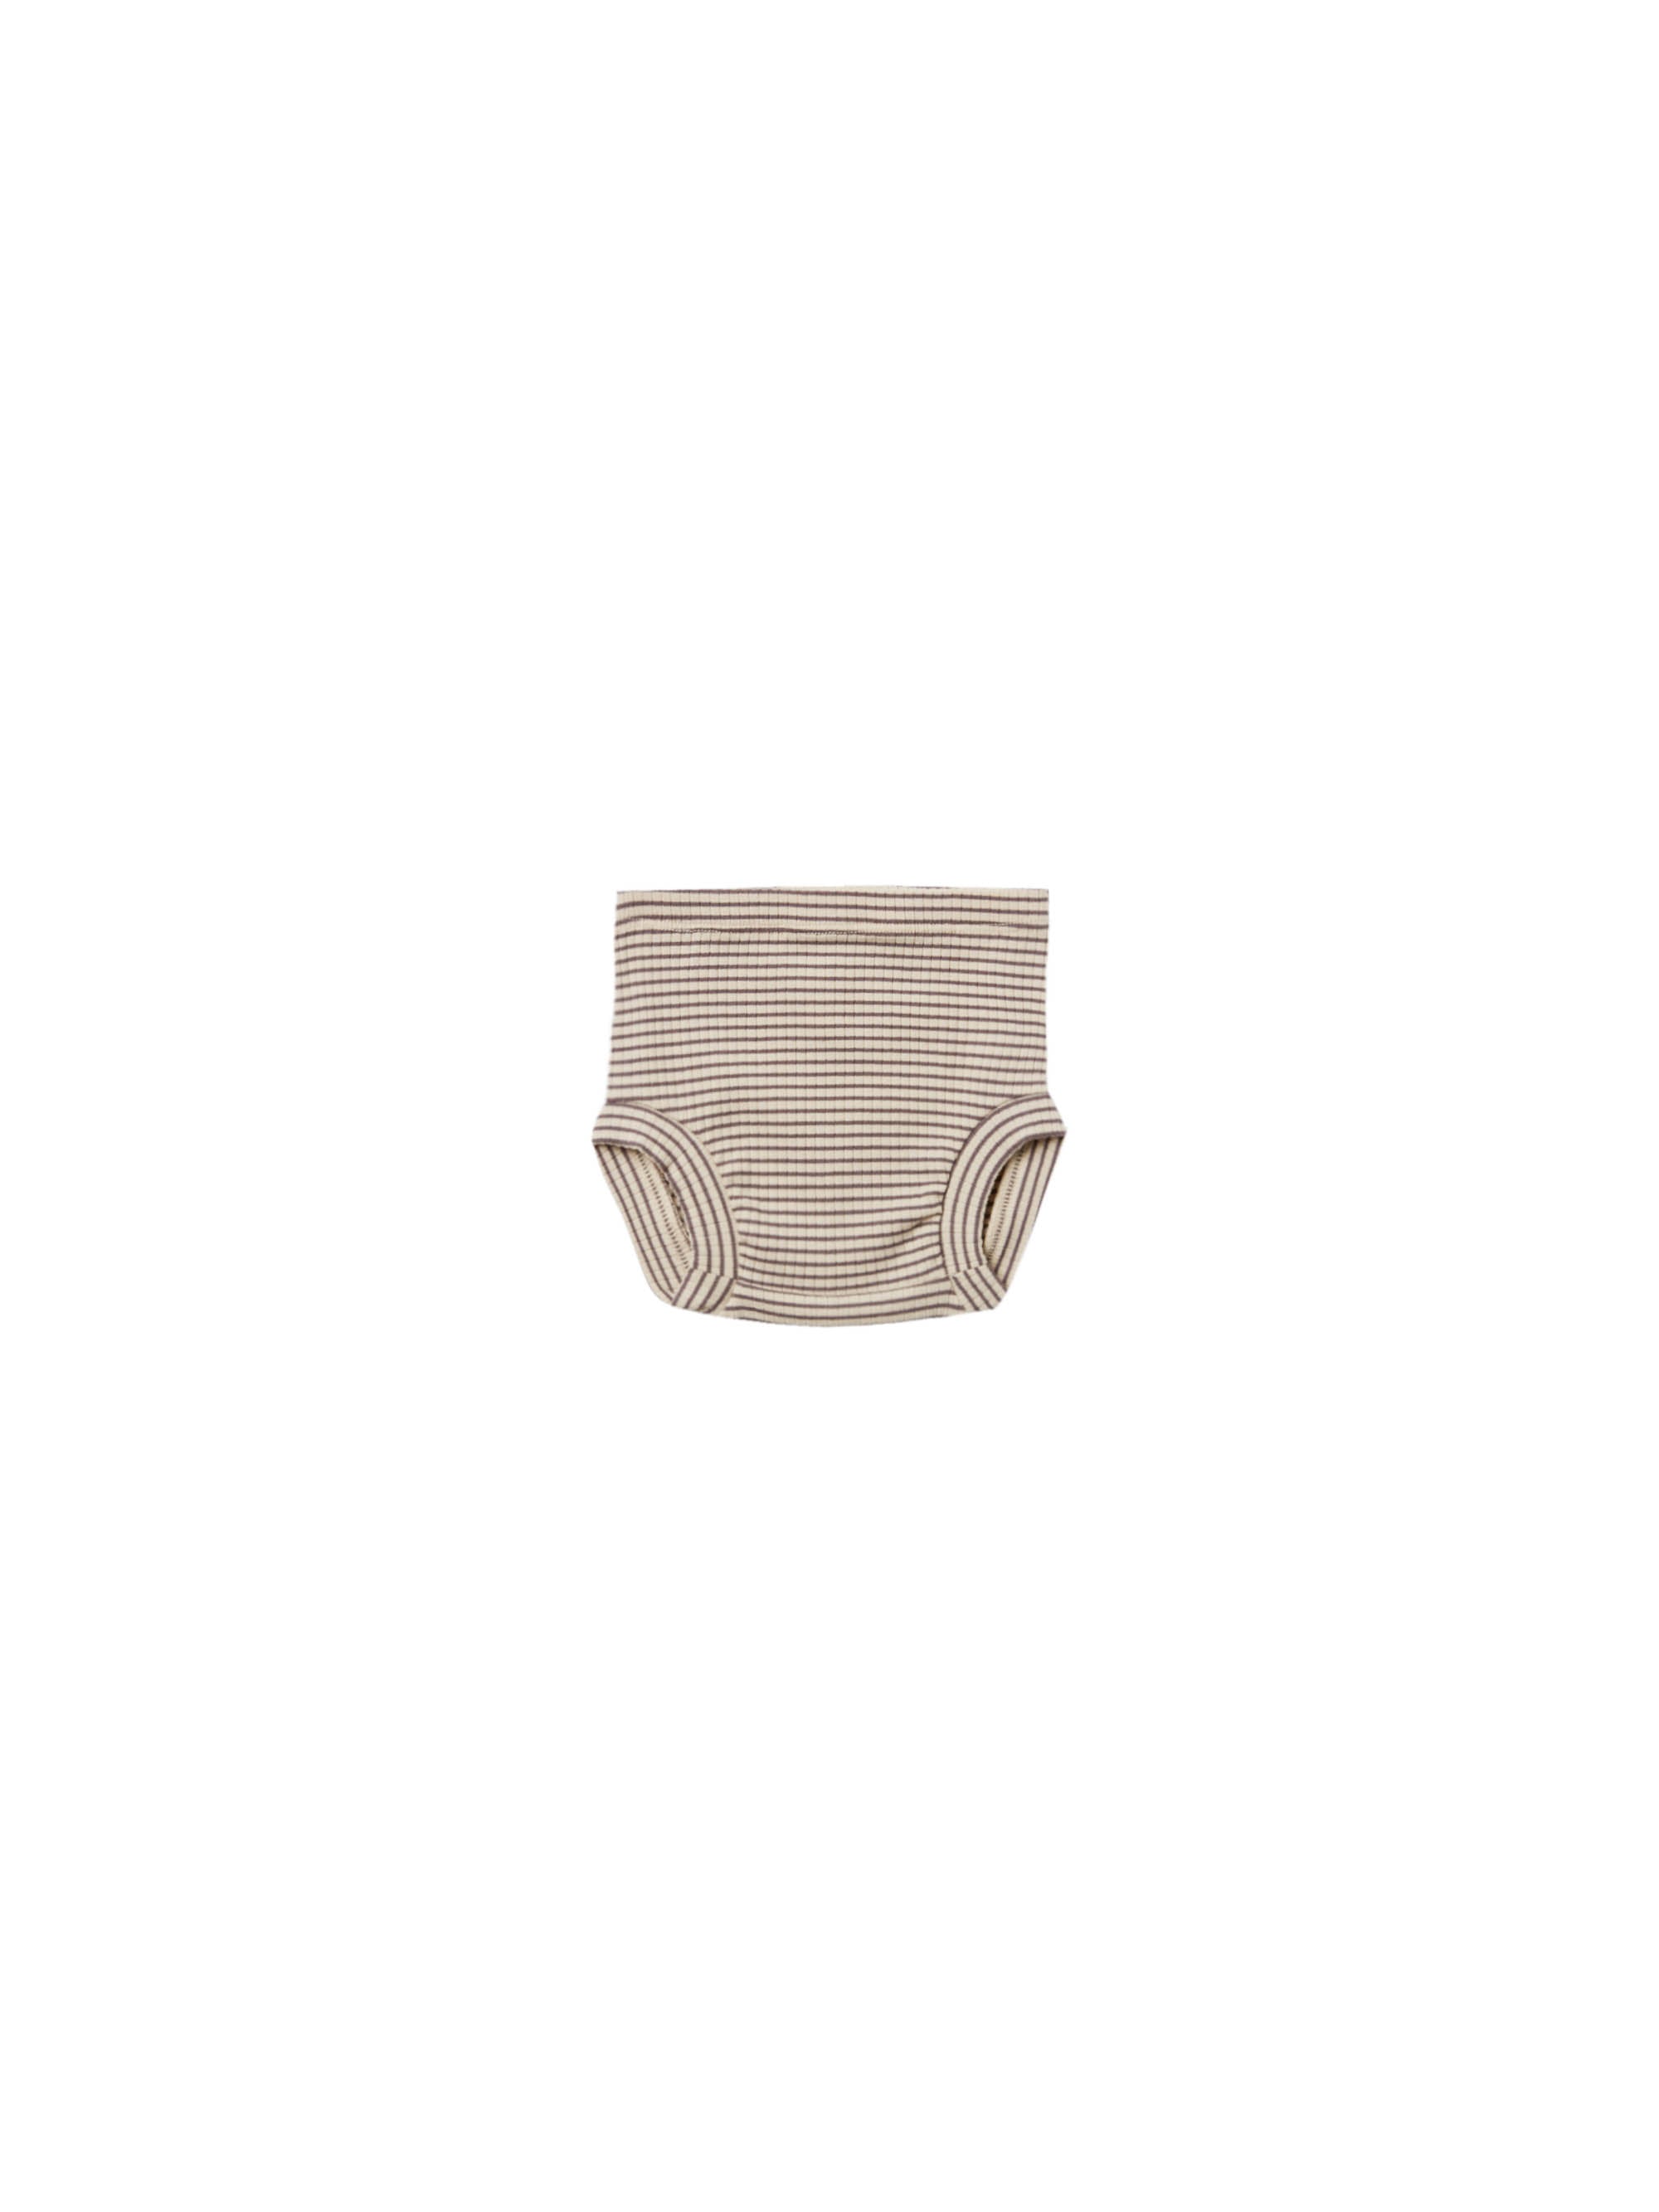 QUINCY MAE RIBBED BLOOMER / CHARCOAL STRIPE